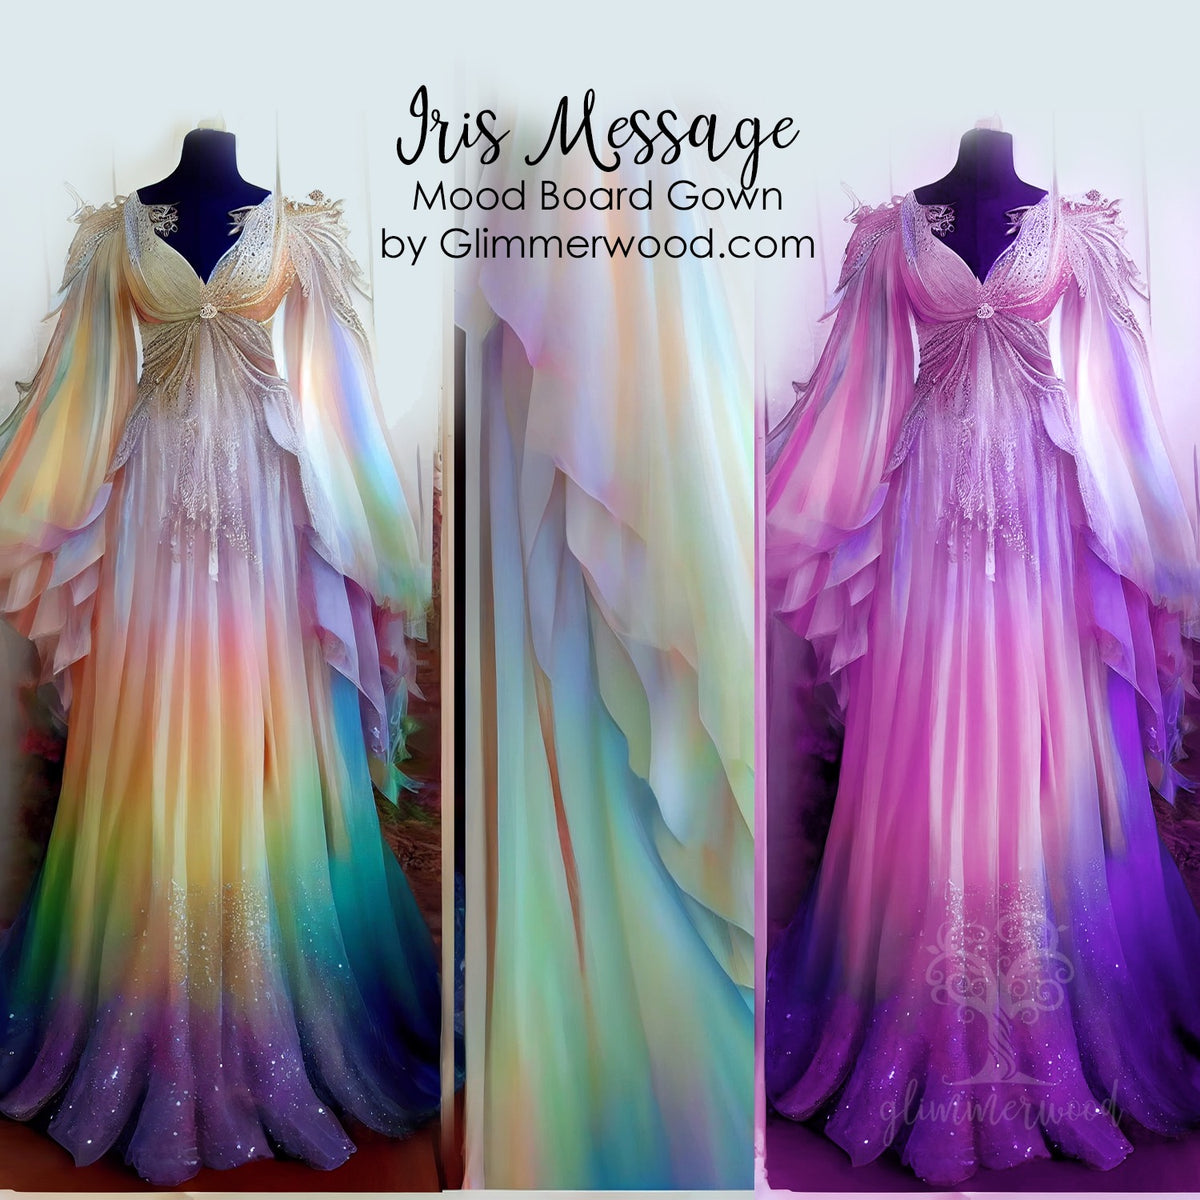 Iris Message - Limited-Edition Mood Board Gown